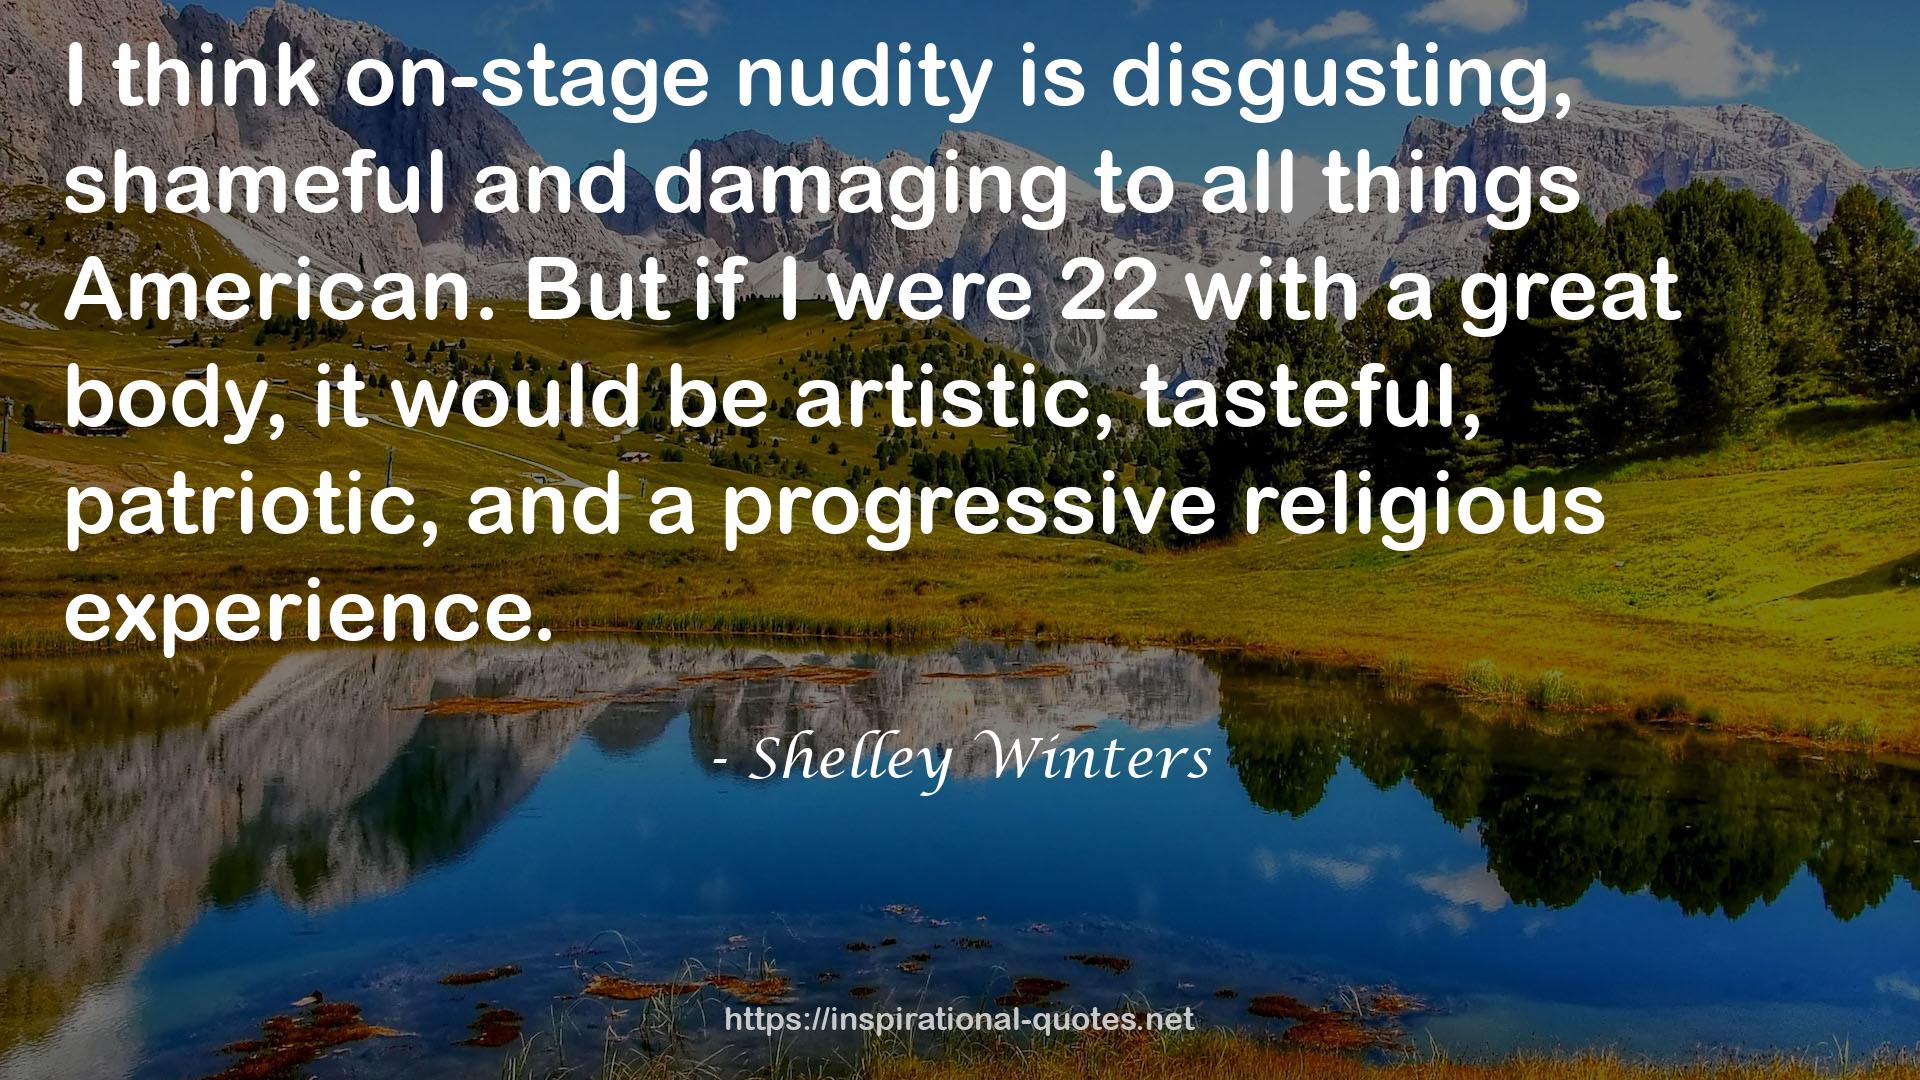 Shelley Winters QUOTES